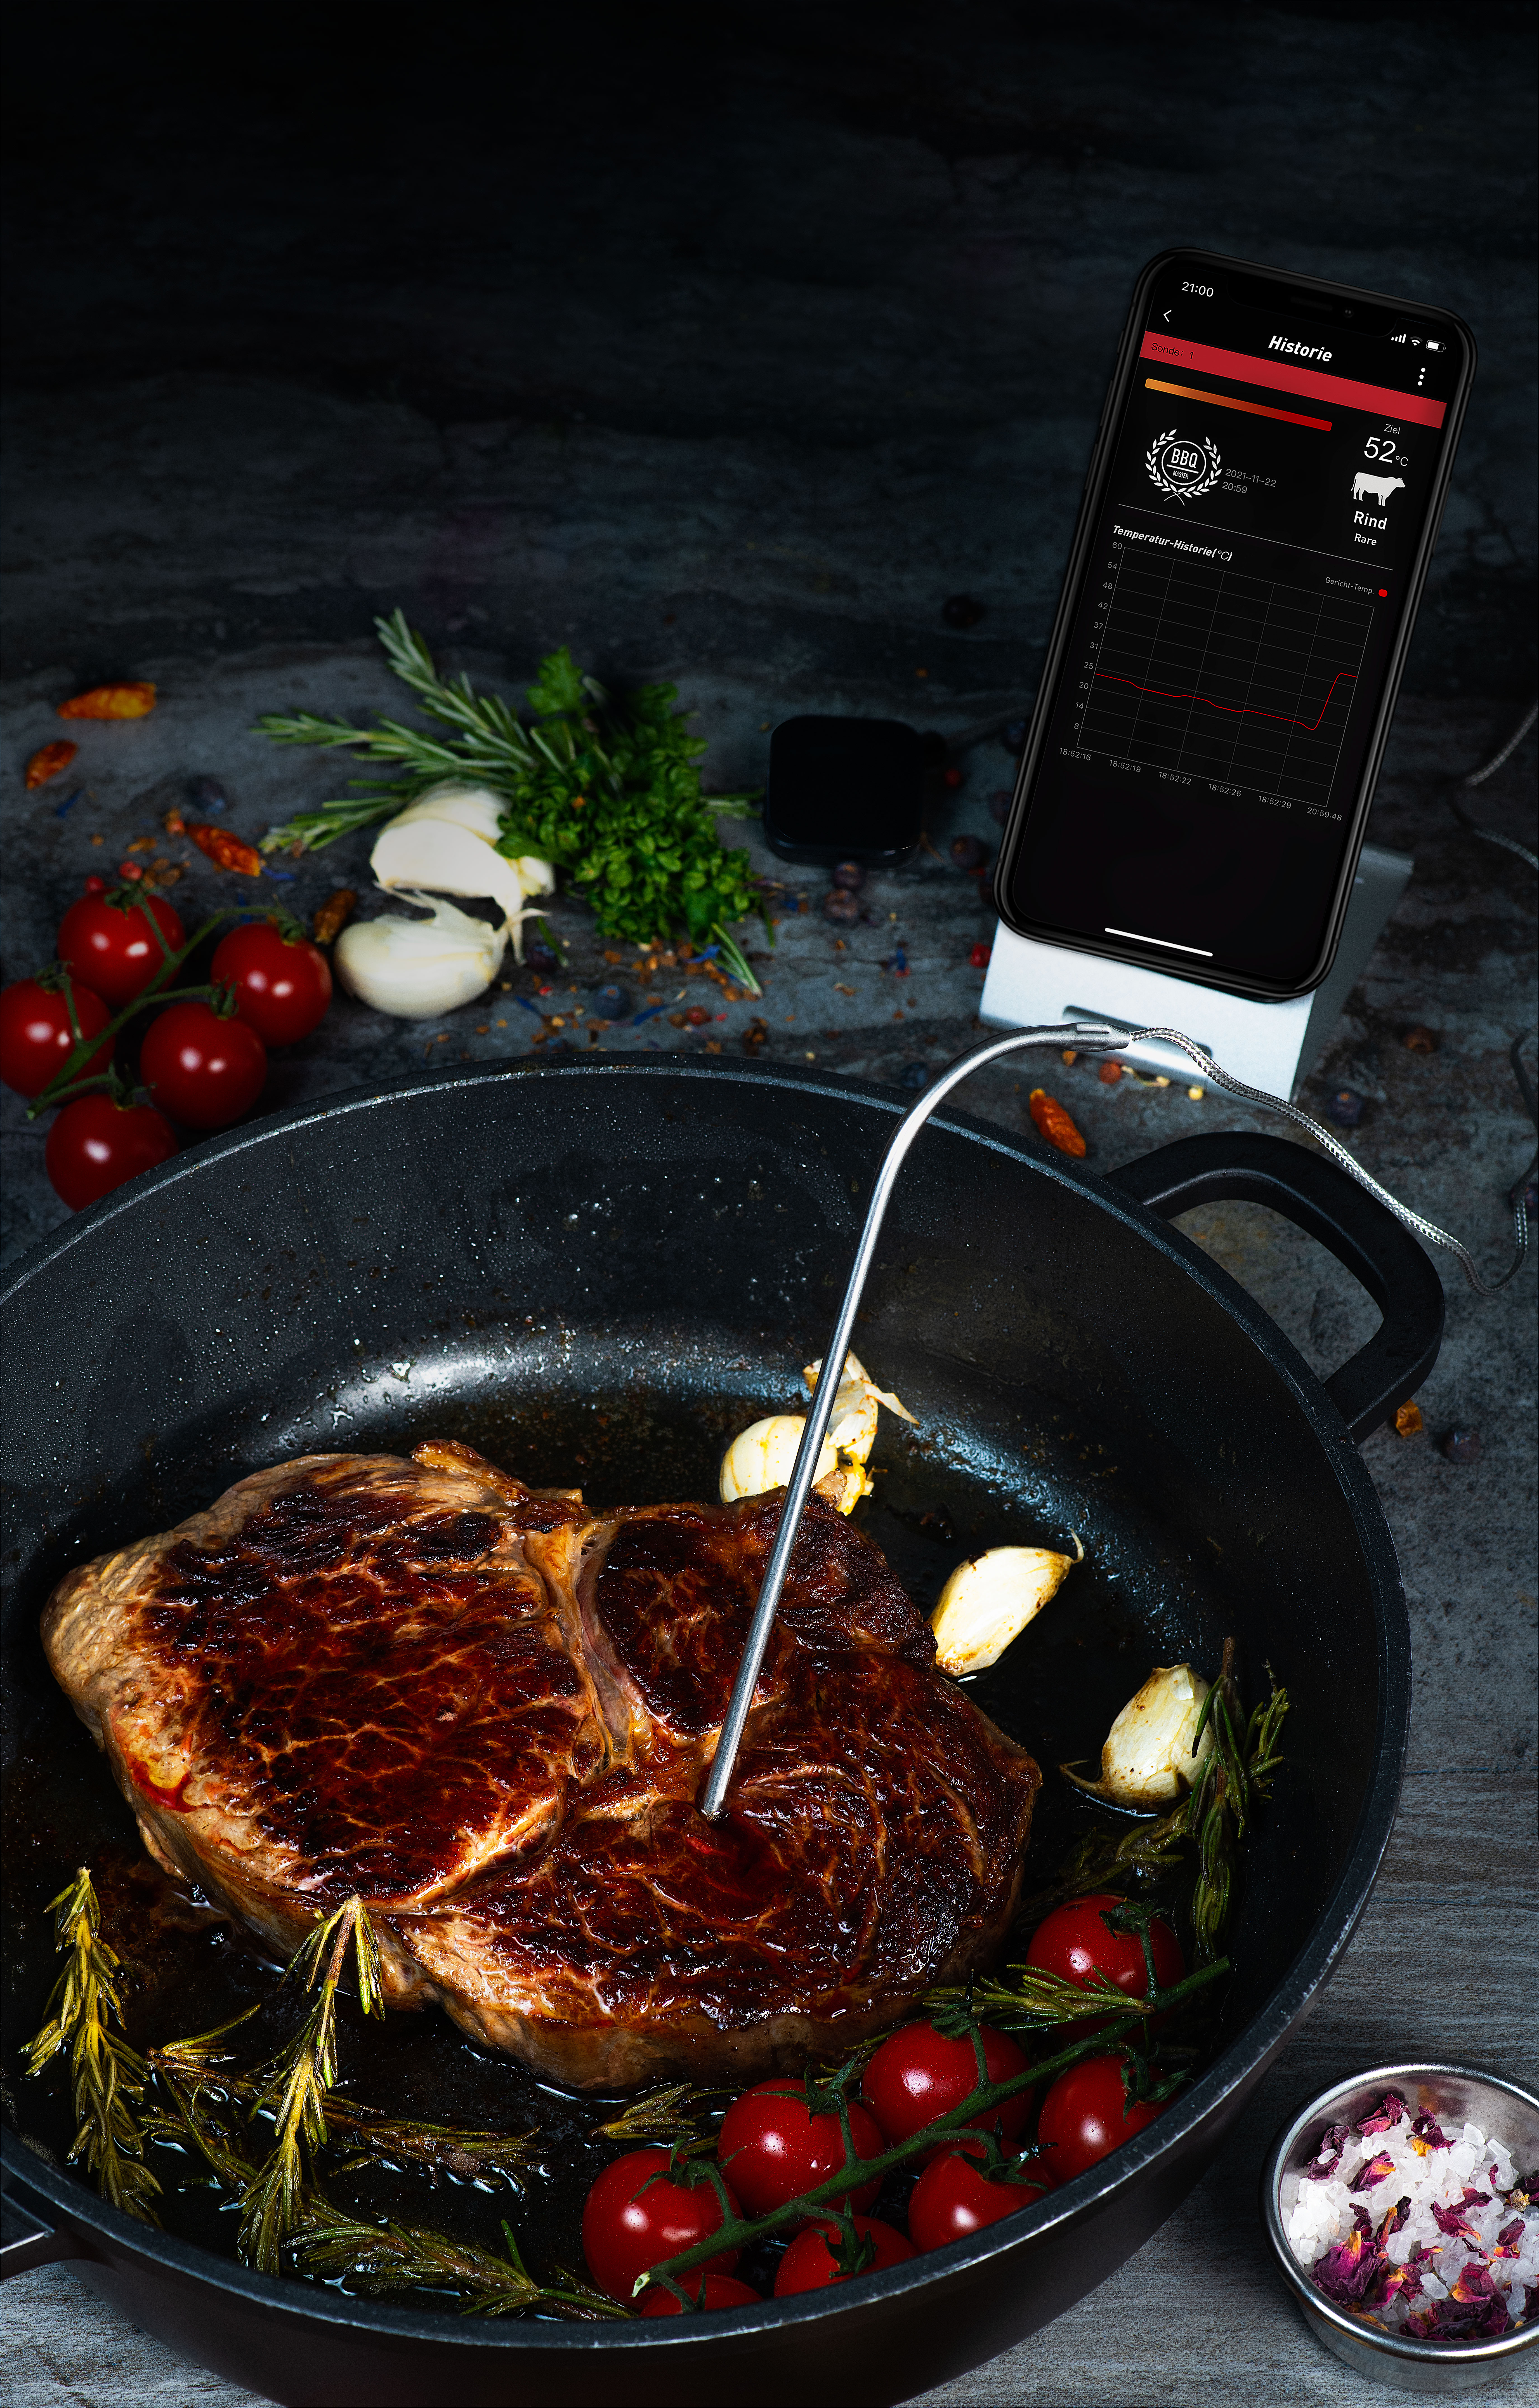 HOT Wireless BBQ thermometer